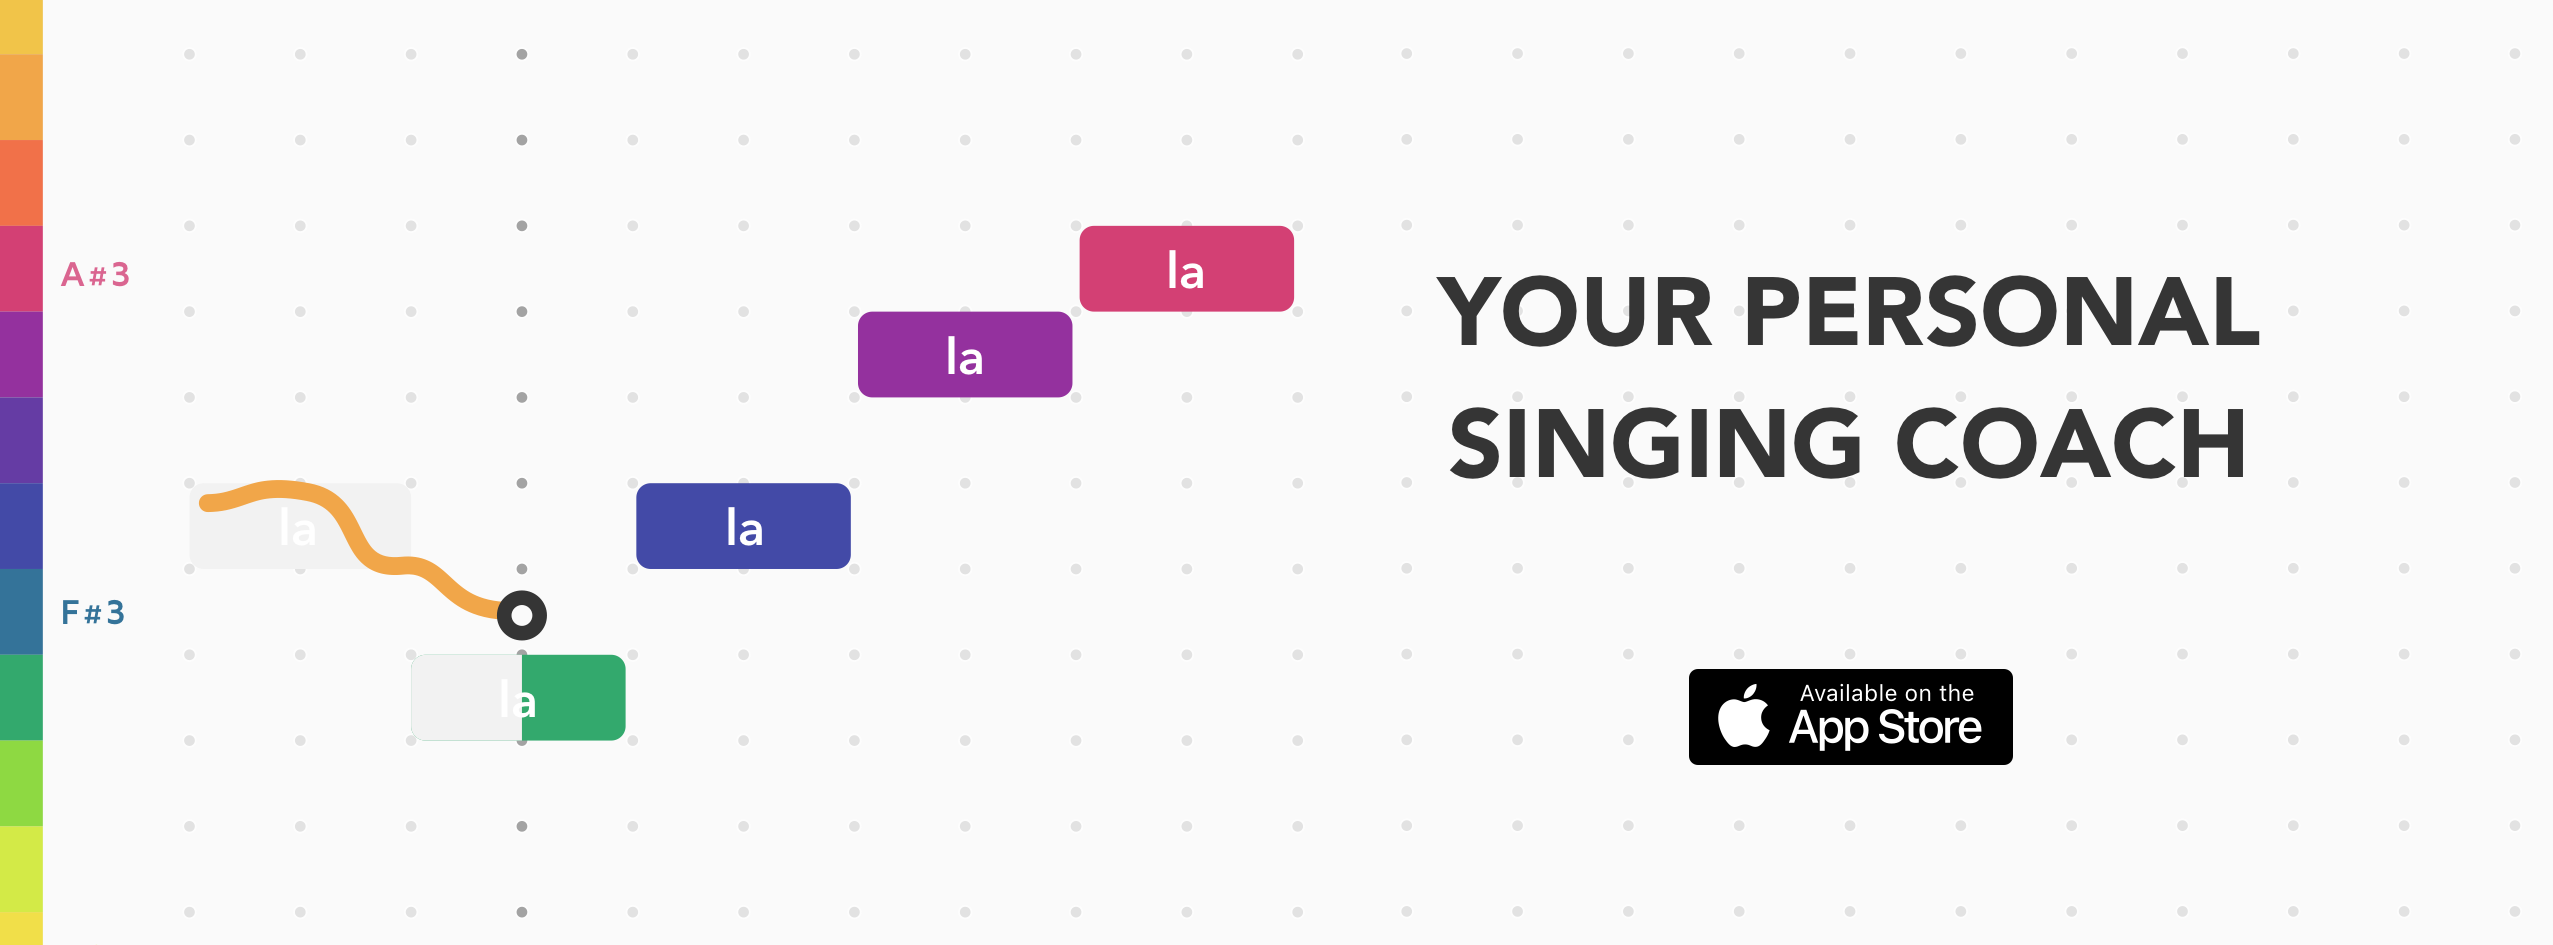 Want to learn how to sing? There’s a free app for that